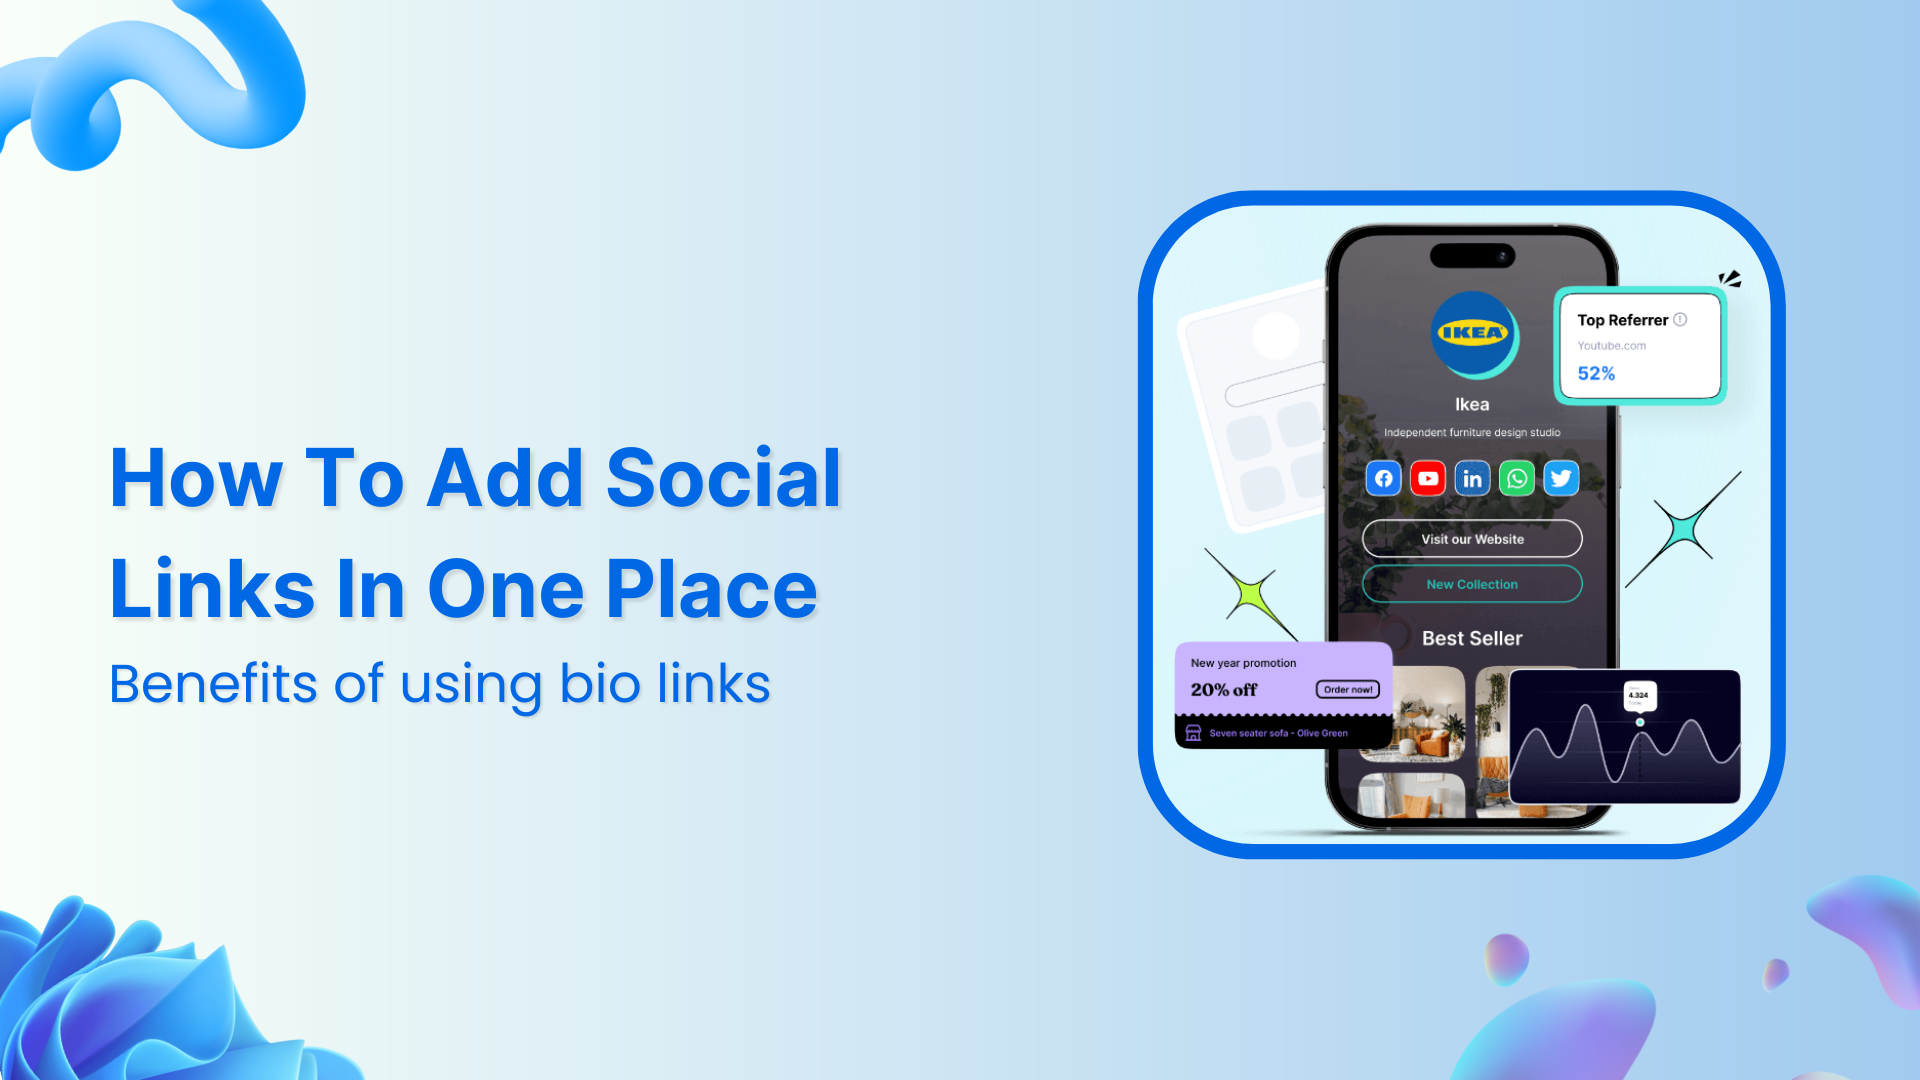 How-To-Add-Social-Media-Links-In-One-Place